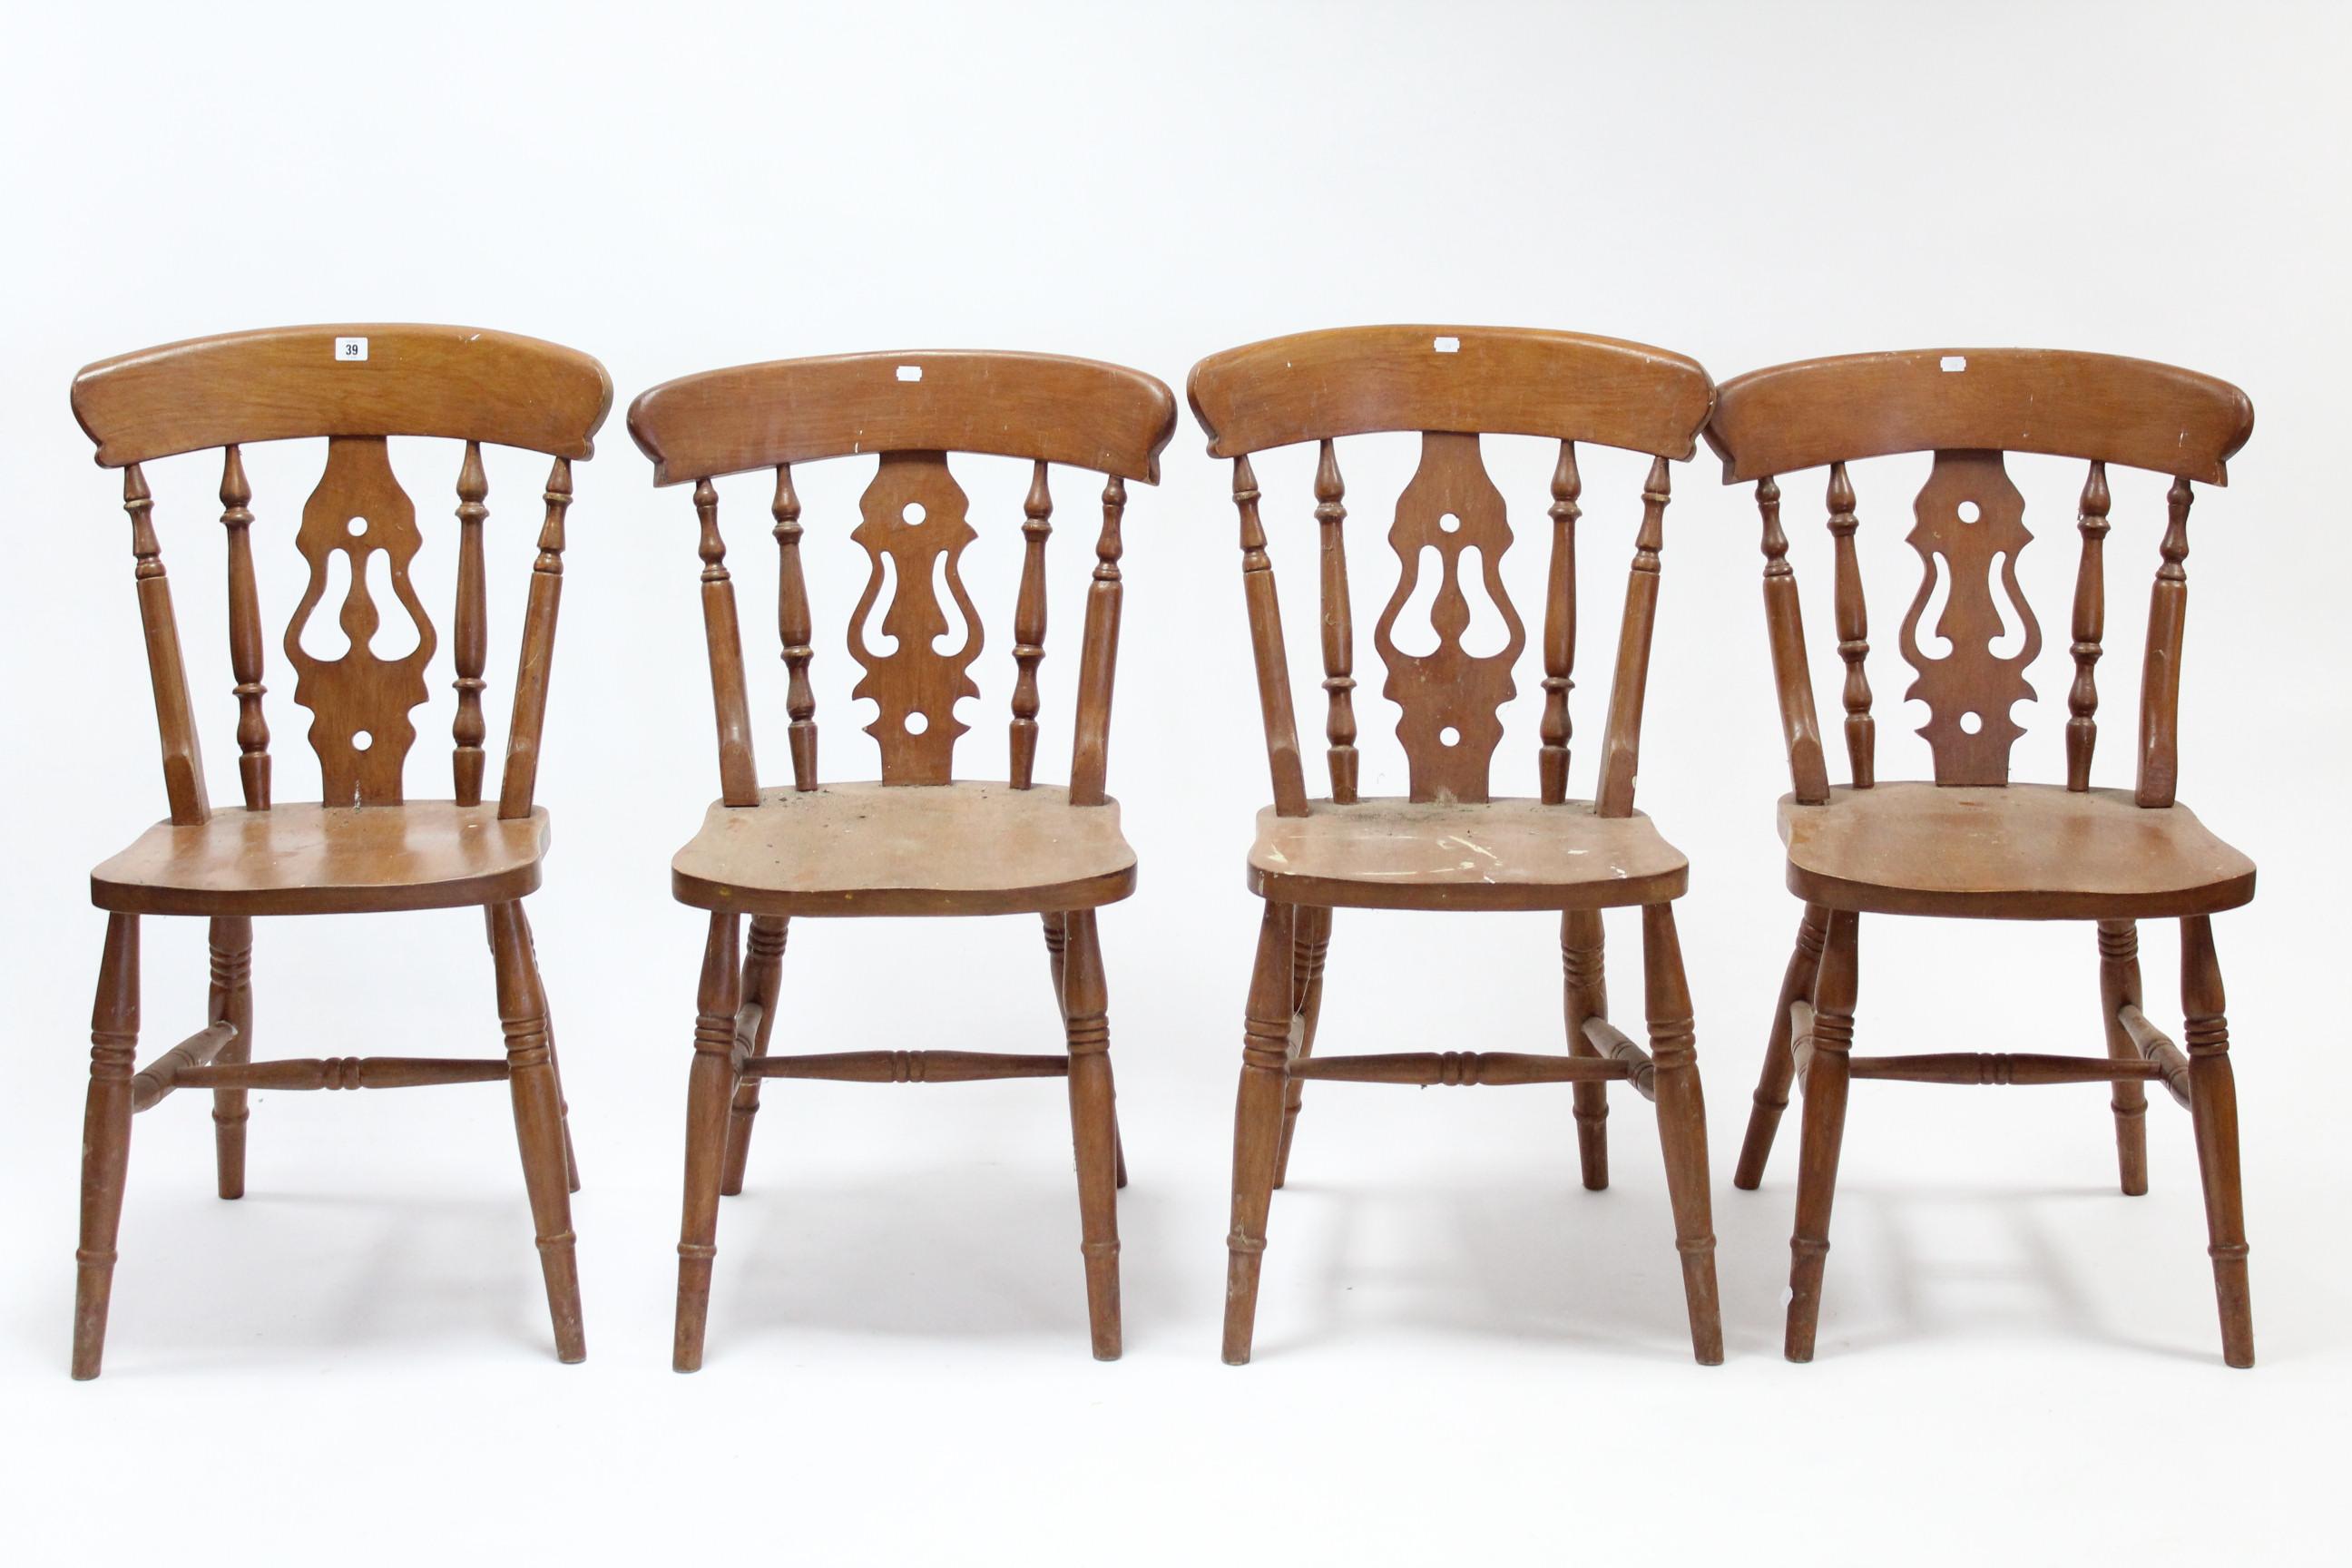 A set of four splat-back kitchen chairs with hard seats, & on turned legs with turned stretchers.